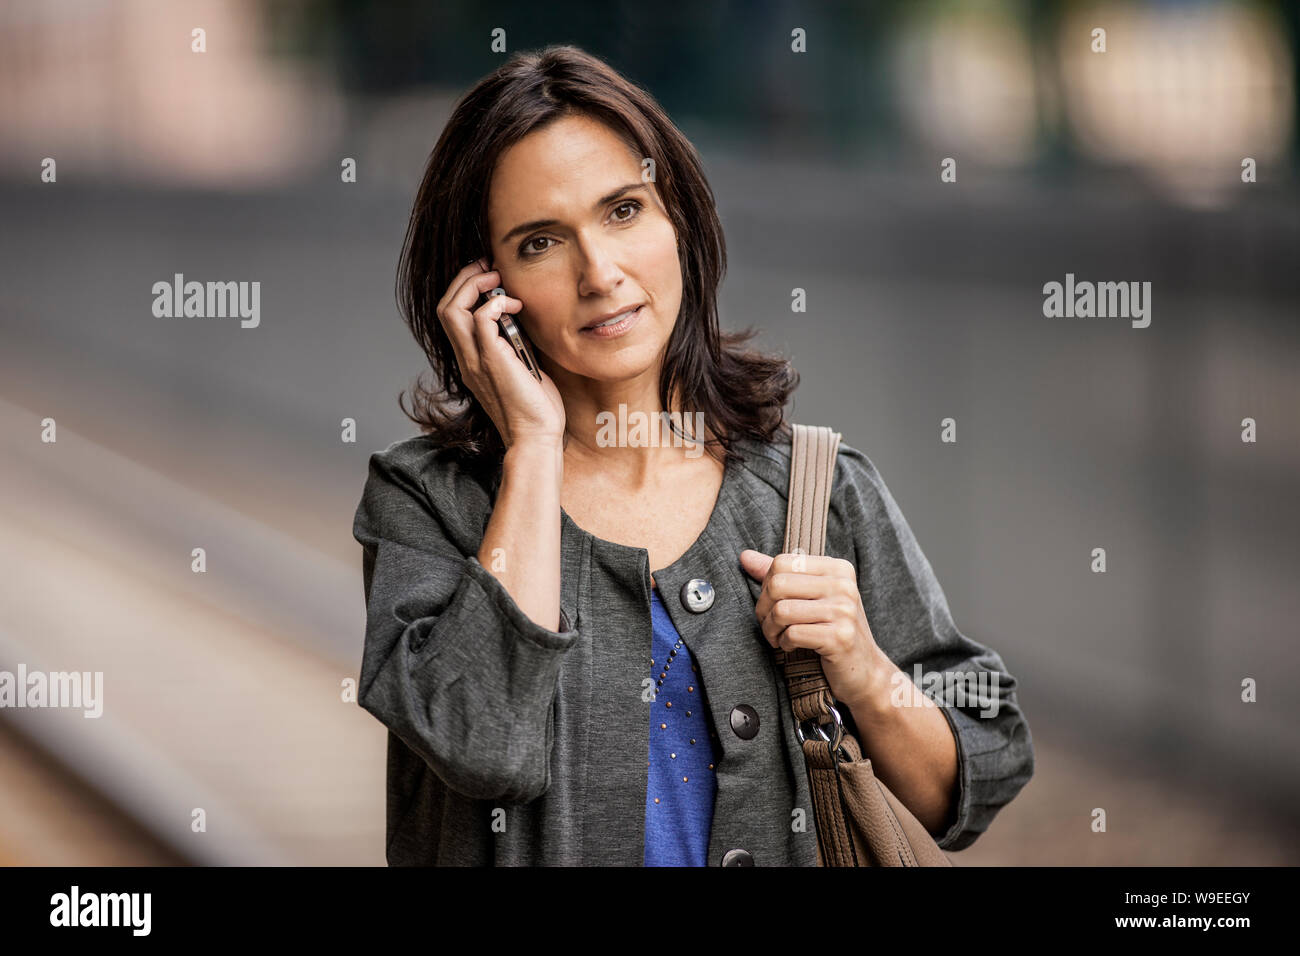 Woman talking on cell phone. Stock Photo